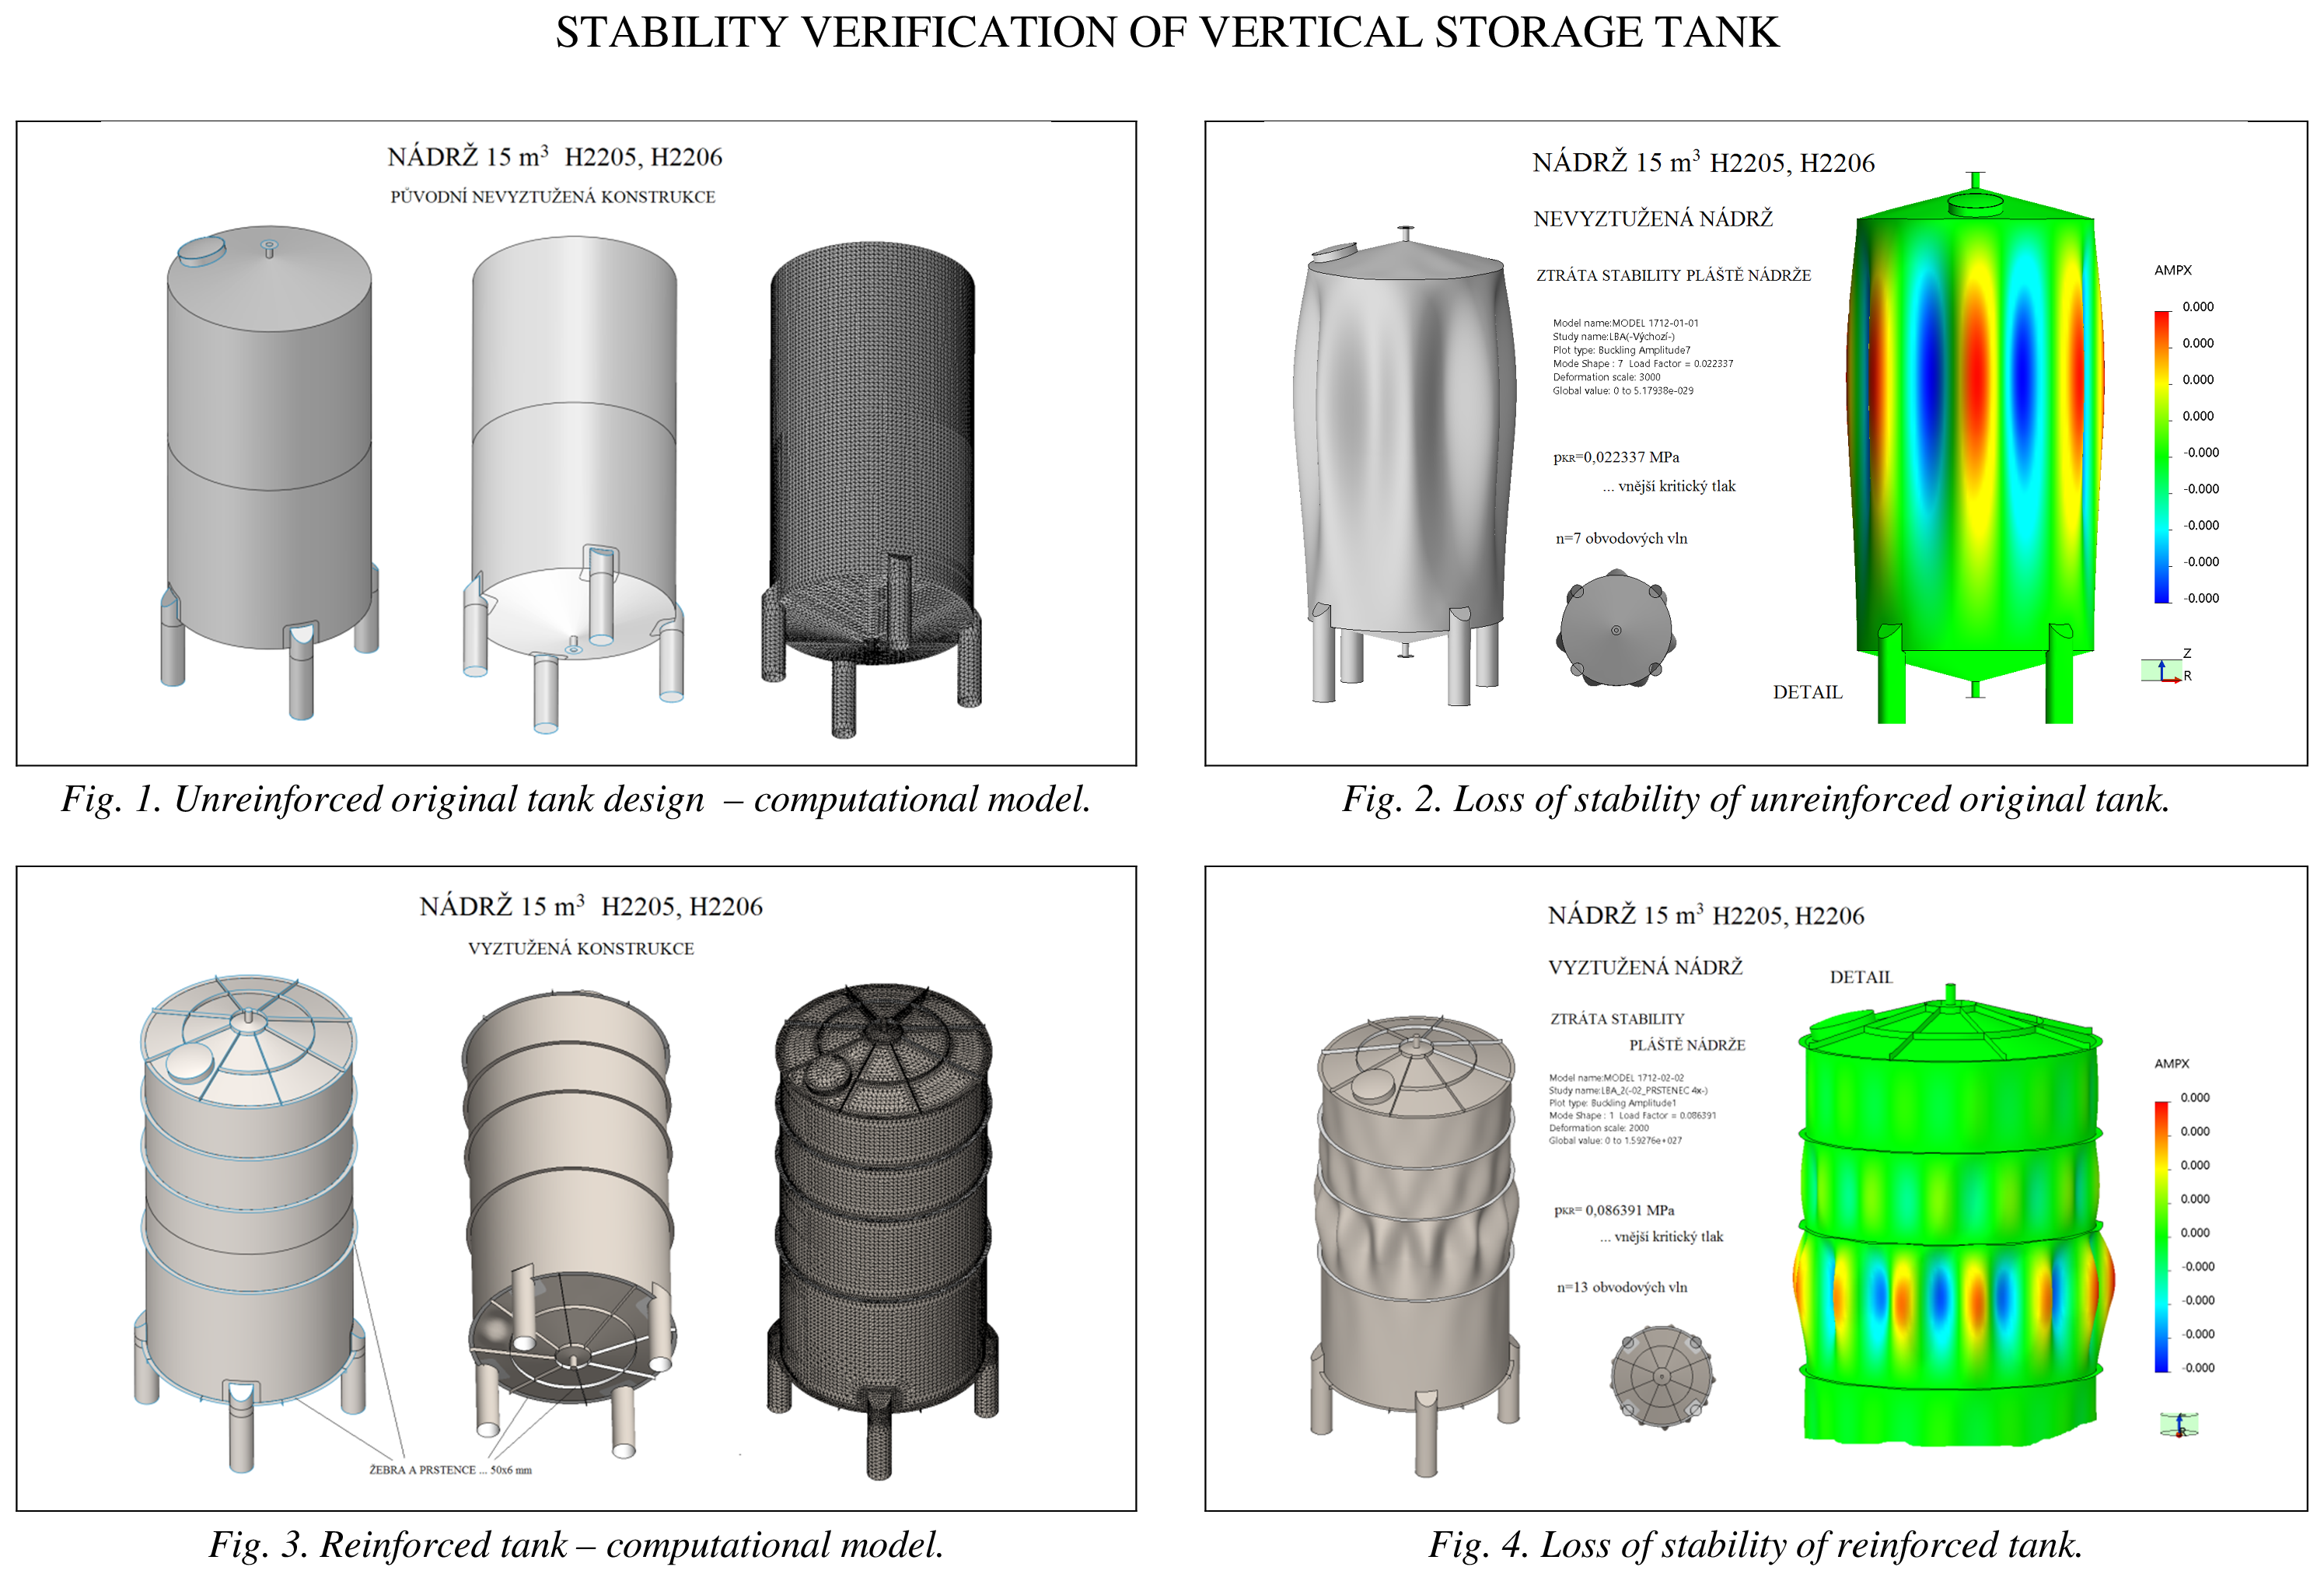 Stability verification of vertical storage tank